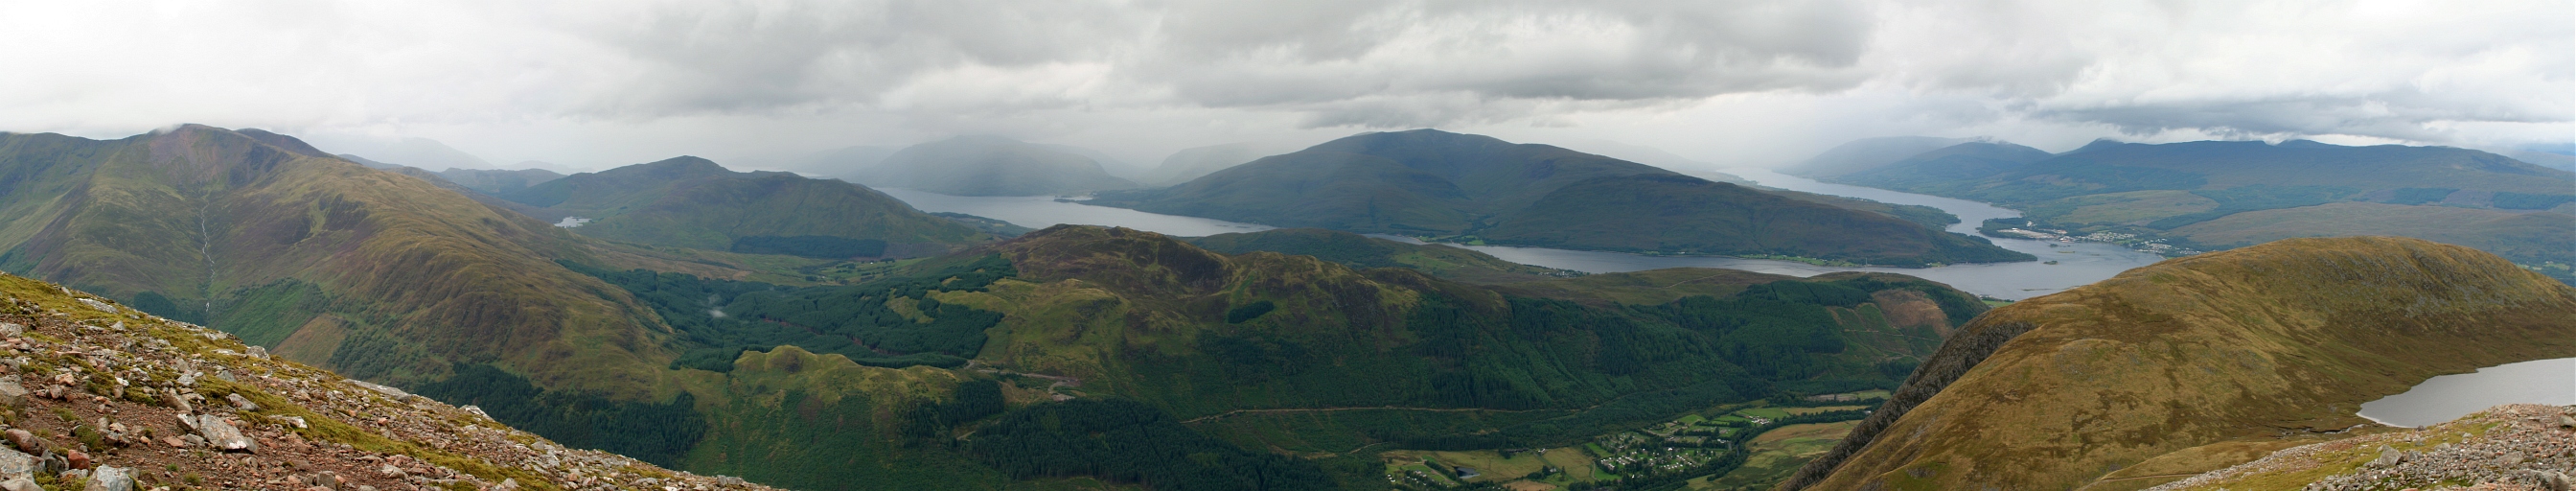 Panorama from the western slope of Ben Nevis, the highest mountain in the British Isles